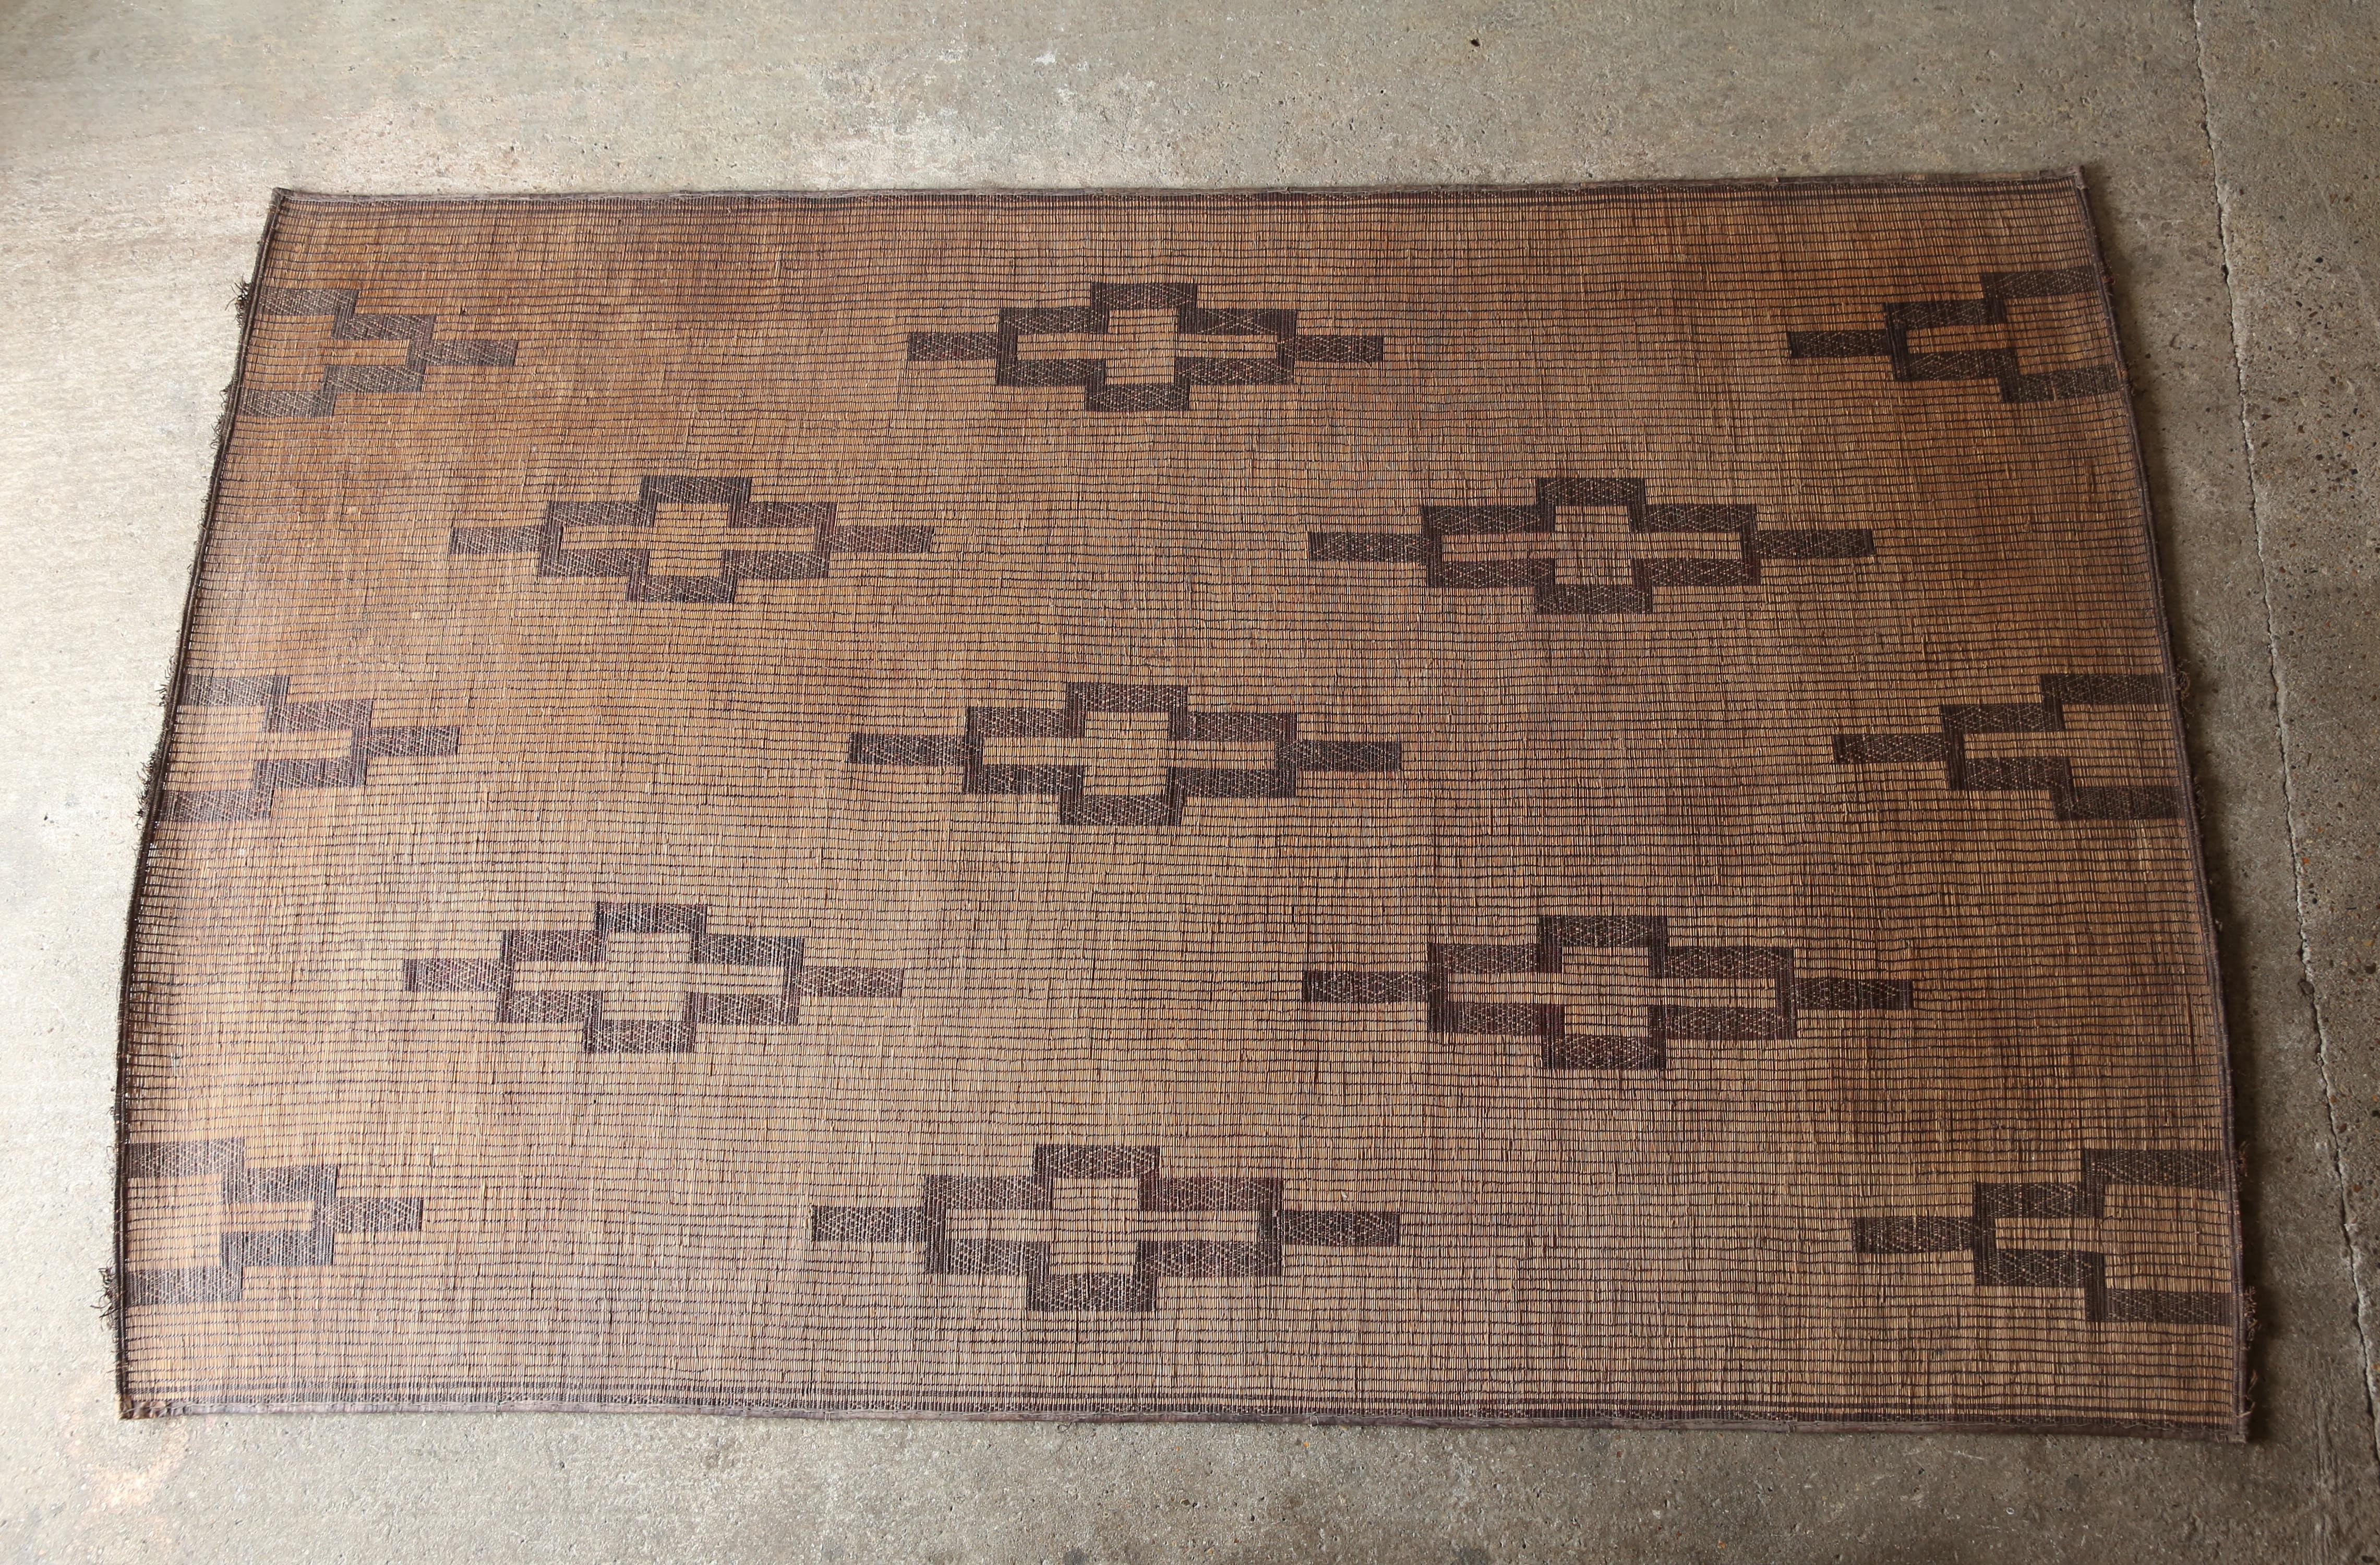 Mid-20th century Moroccan Tuareg Mat / Rug.  Hand woven natural reed / palm fibres and leather.  Rarely found with a nice minimal pattern and such good patina.   Some losses to reed as is normal on mats of this age.
Fast shipping worldwide.